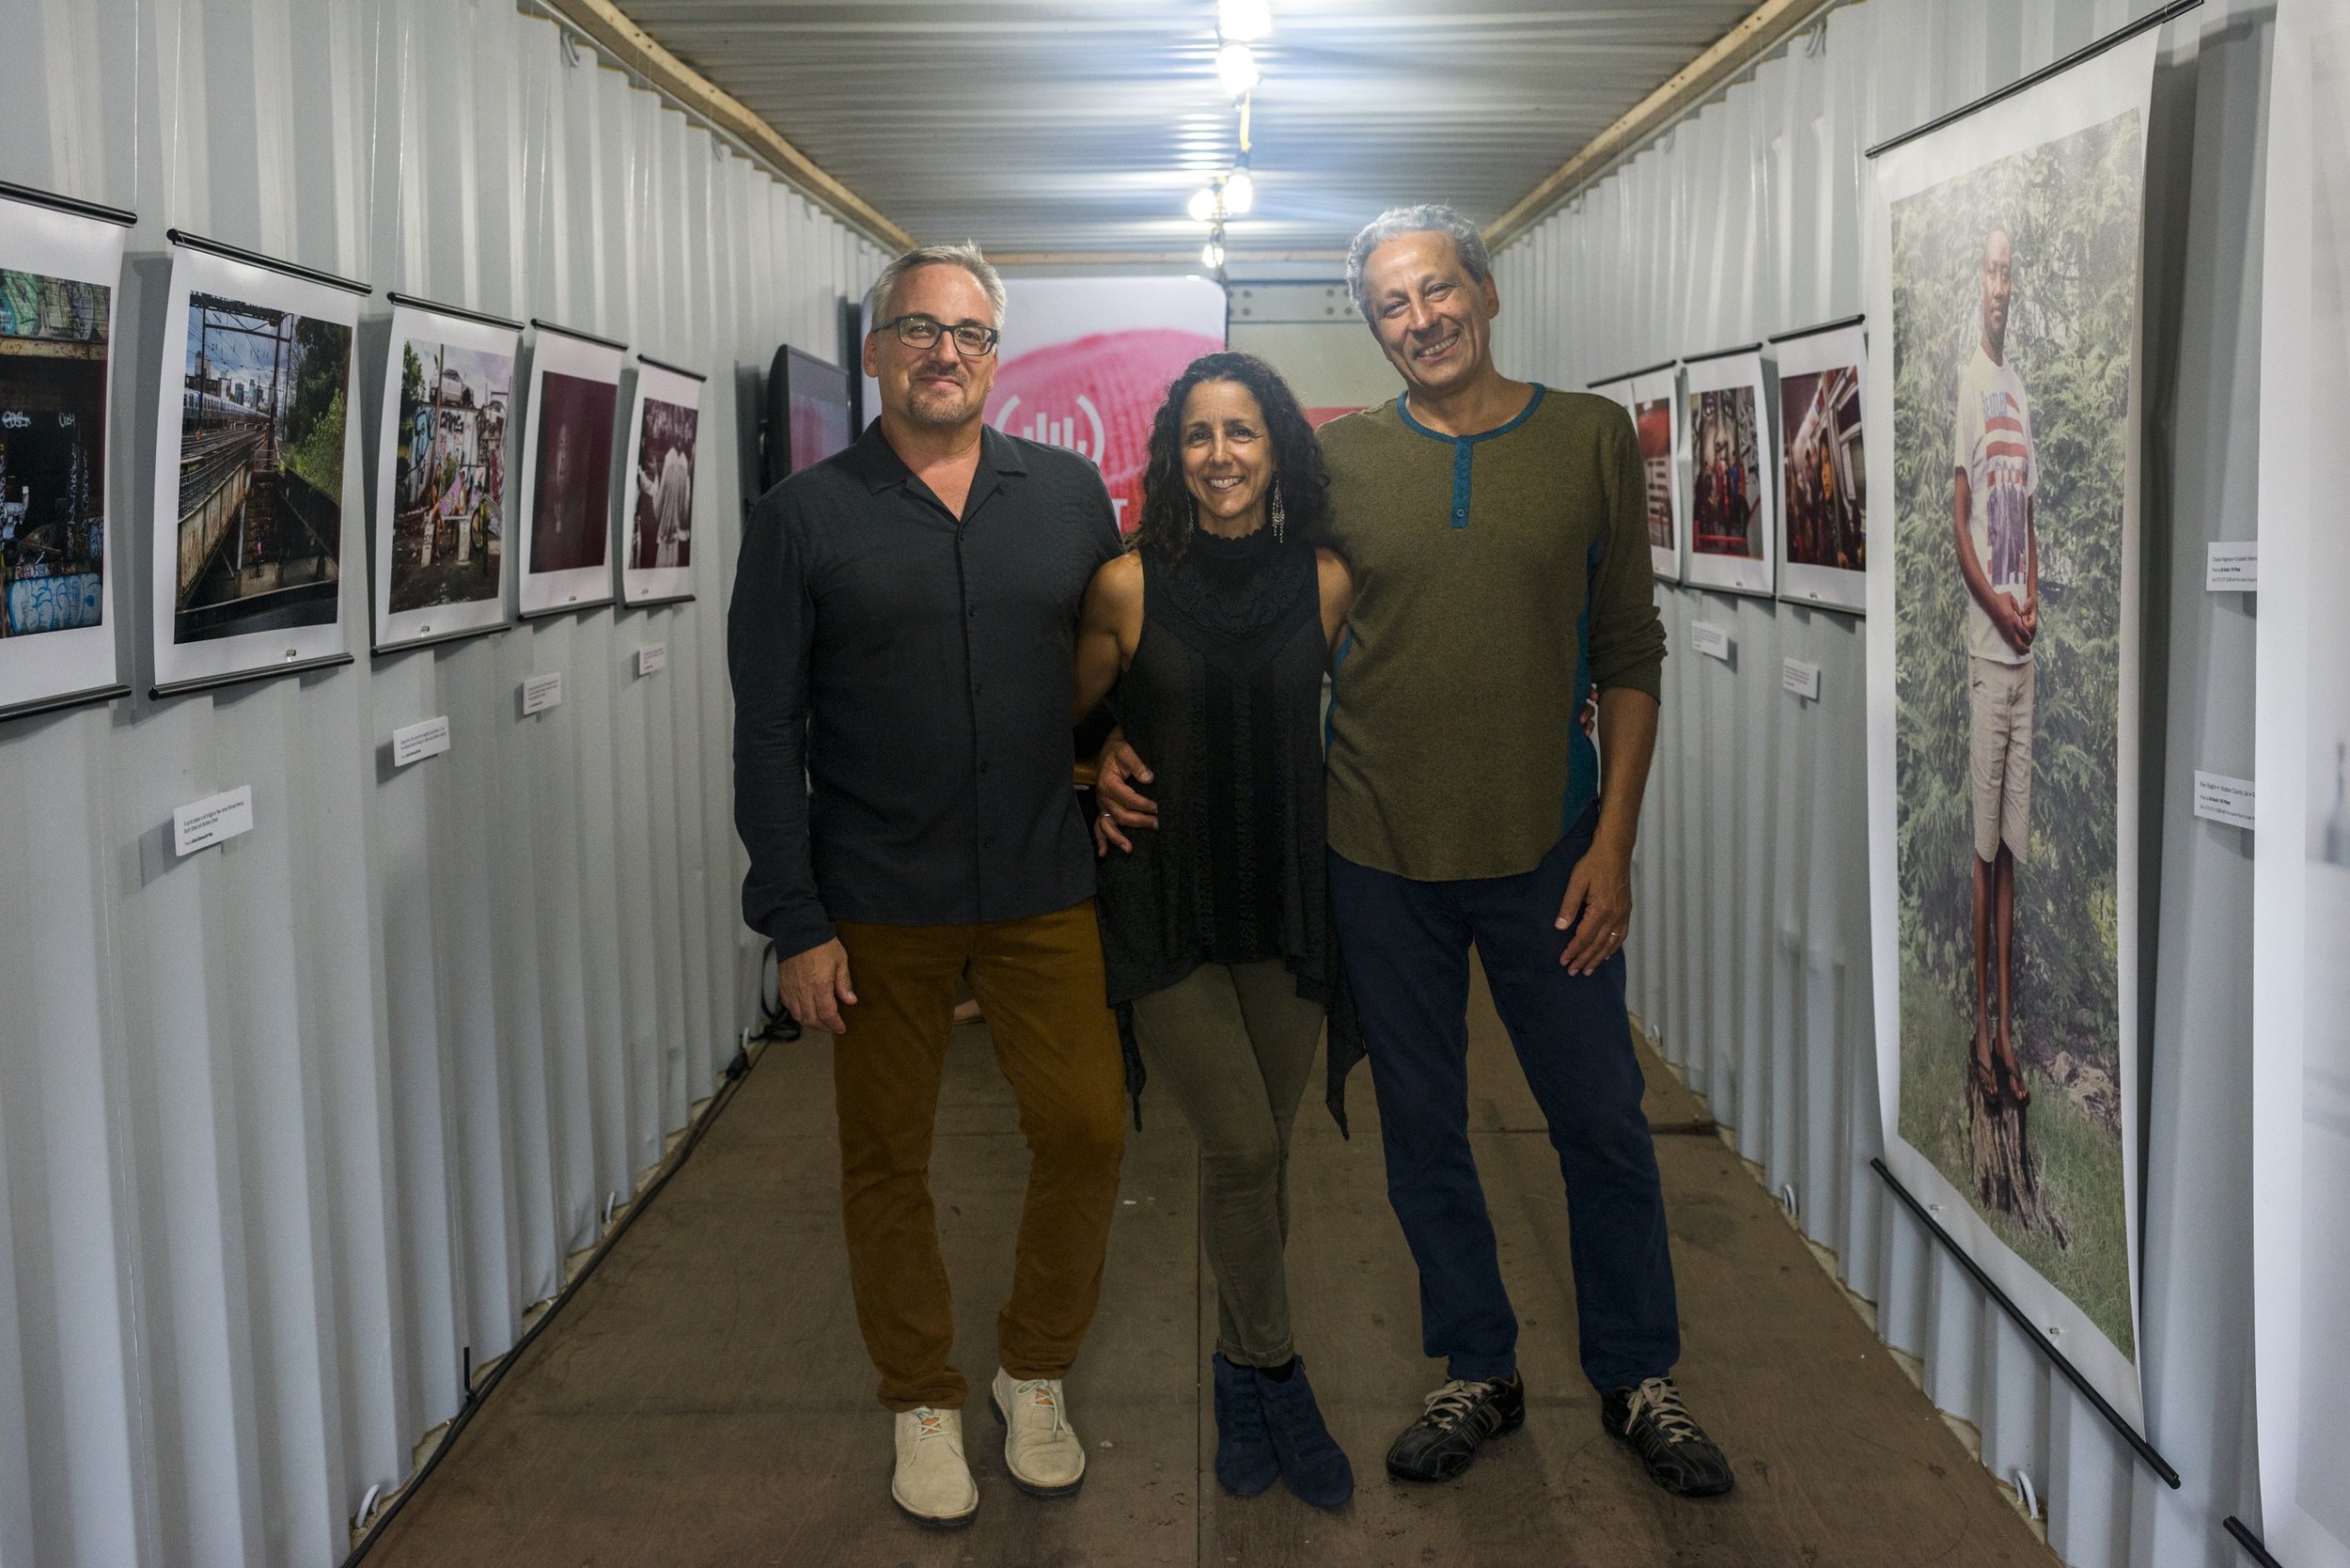  Newest Americans partners Tim Raphael, Julie Winokur, and Ed Kashi smile for the camera in our container exhibit. (Photo by Gareth Smit) 